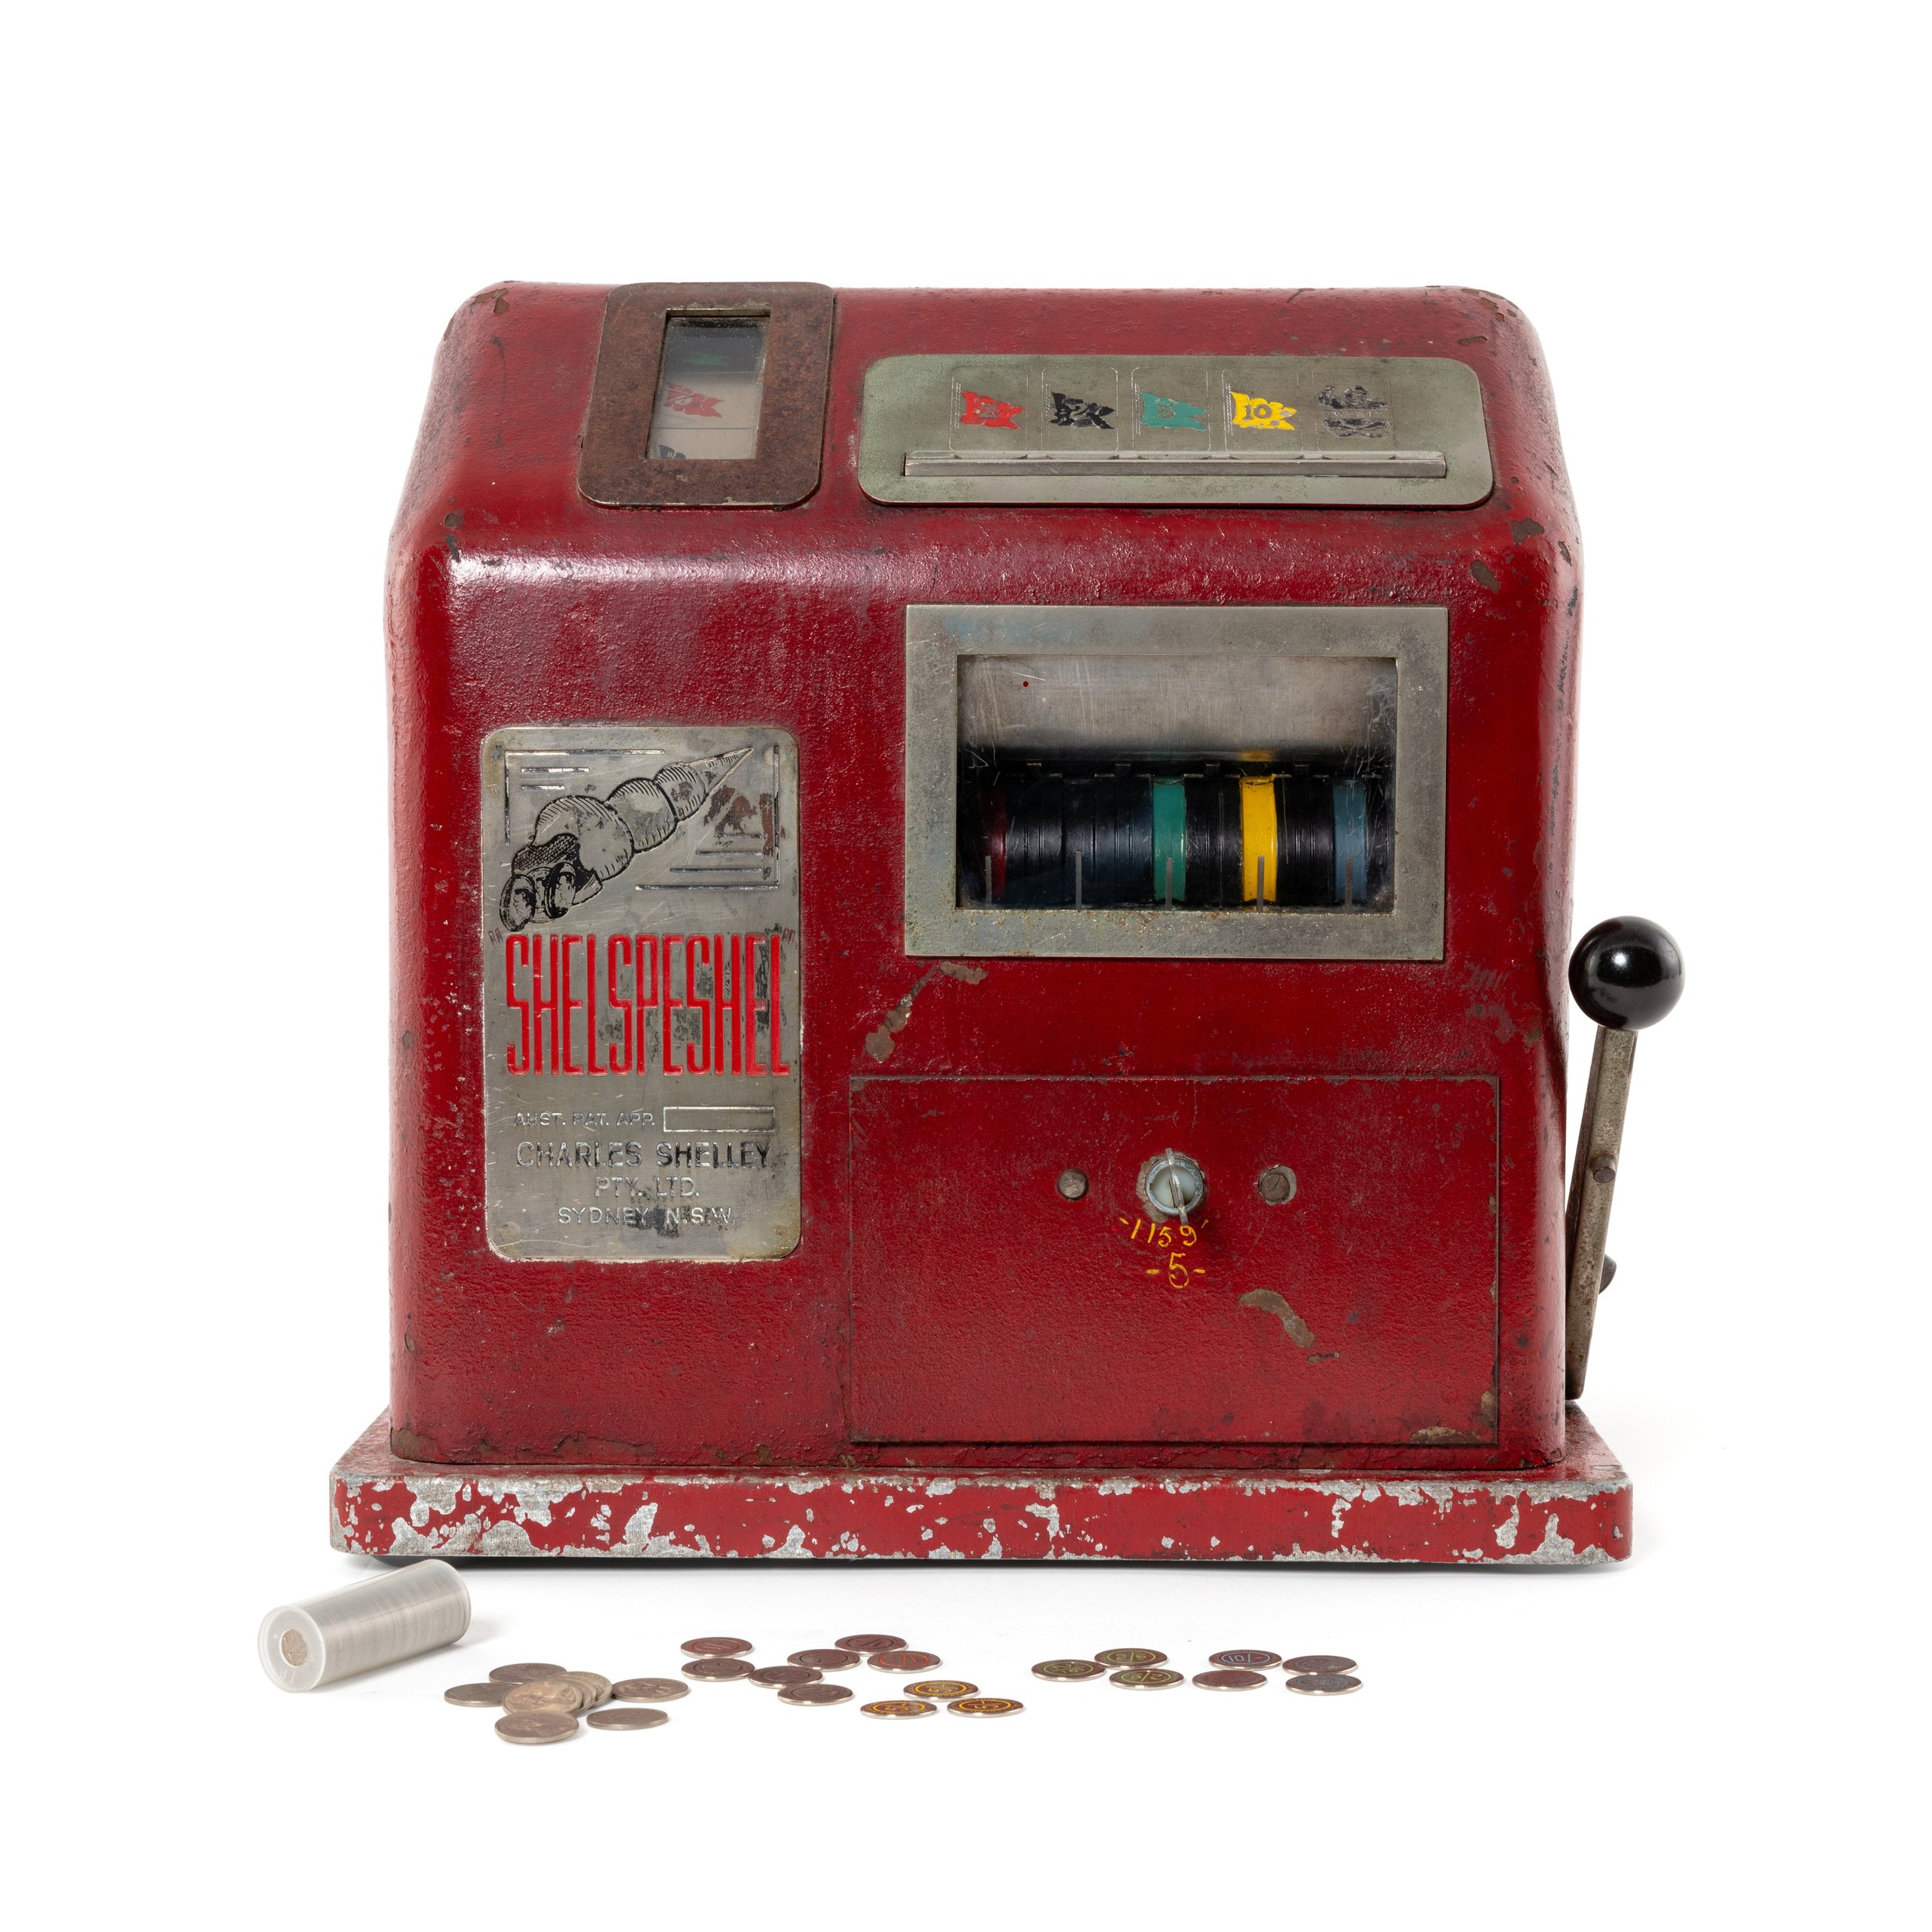 'Shelspeshel' poker machine with tokens by Charles Shelley Proprietary Limited